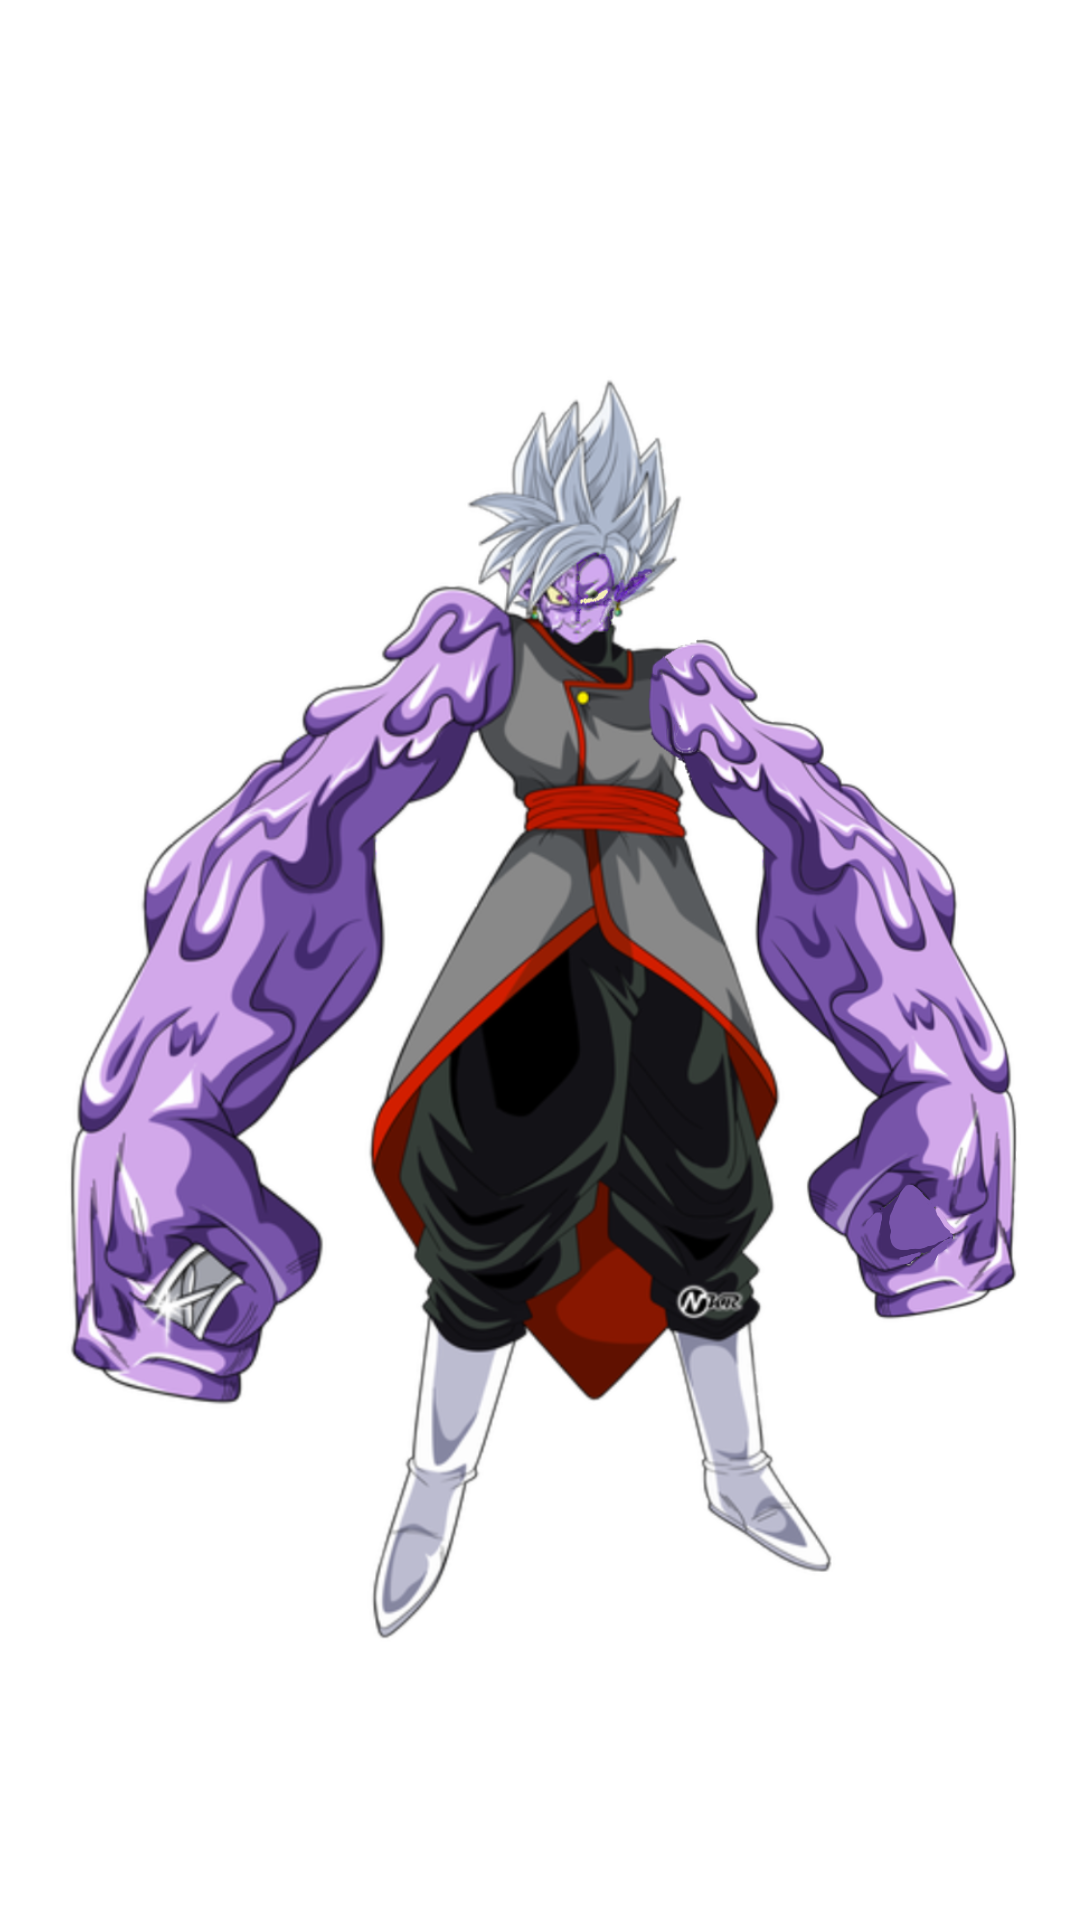 2 OP CODEs & New OP Code Unit Corrupted Zamasu Dropping Soon!